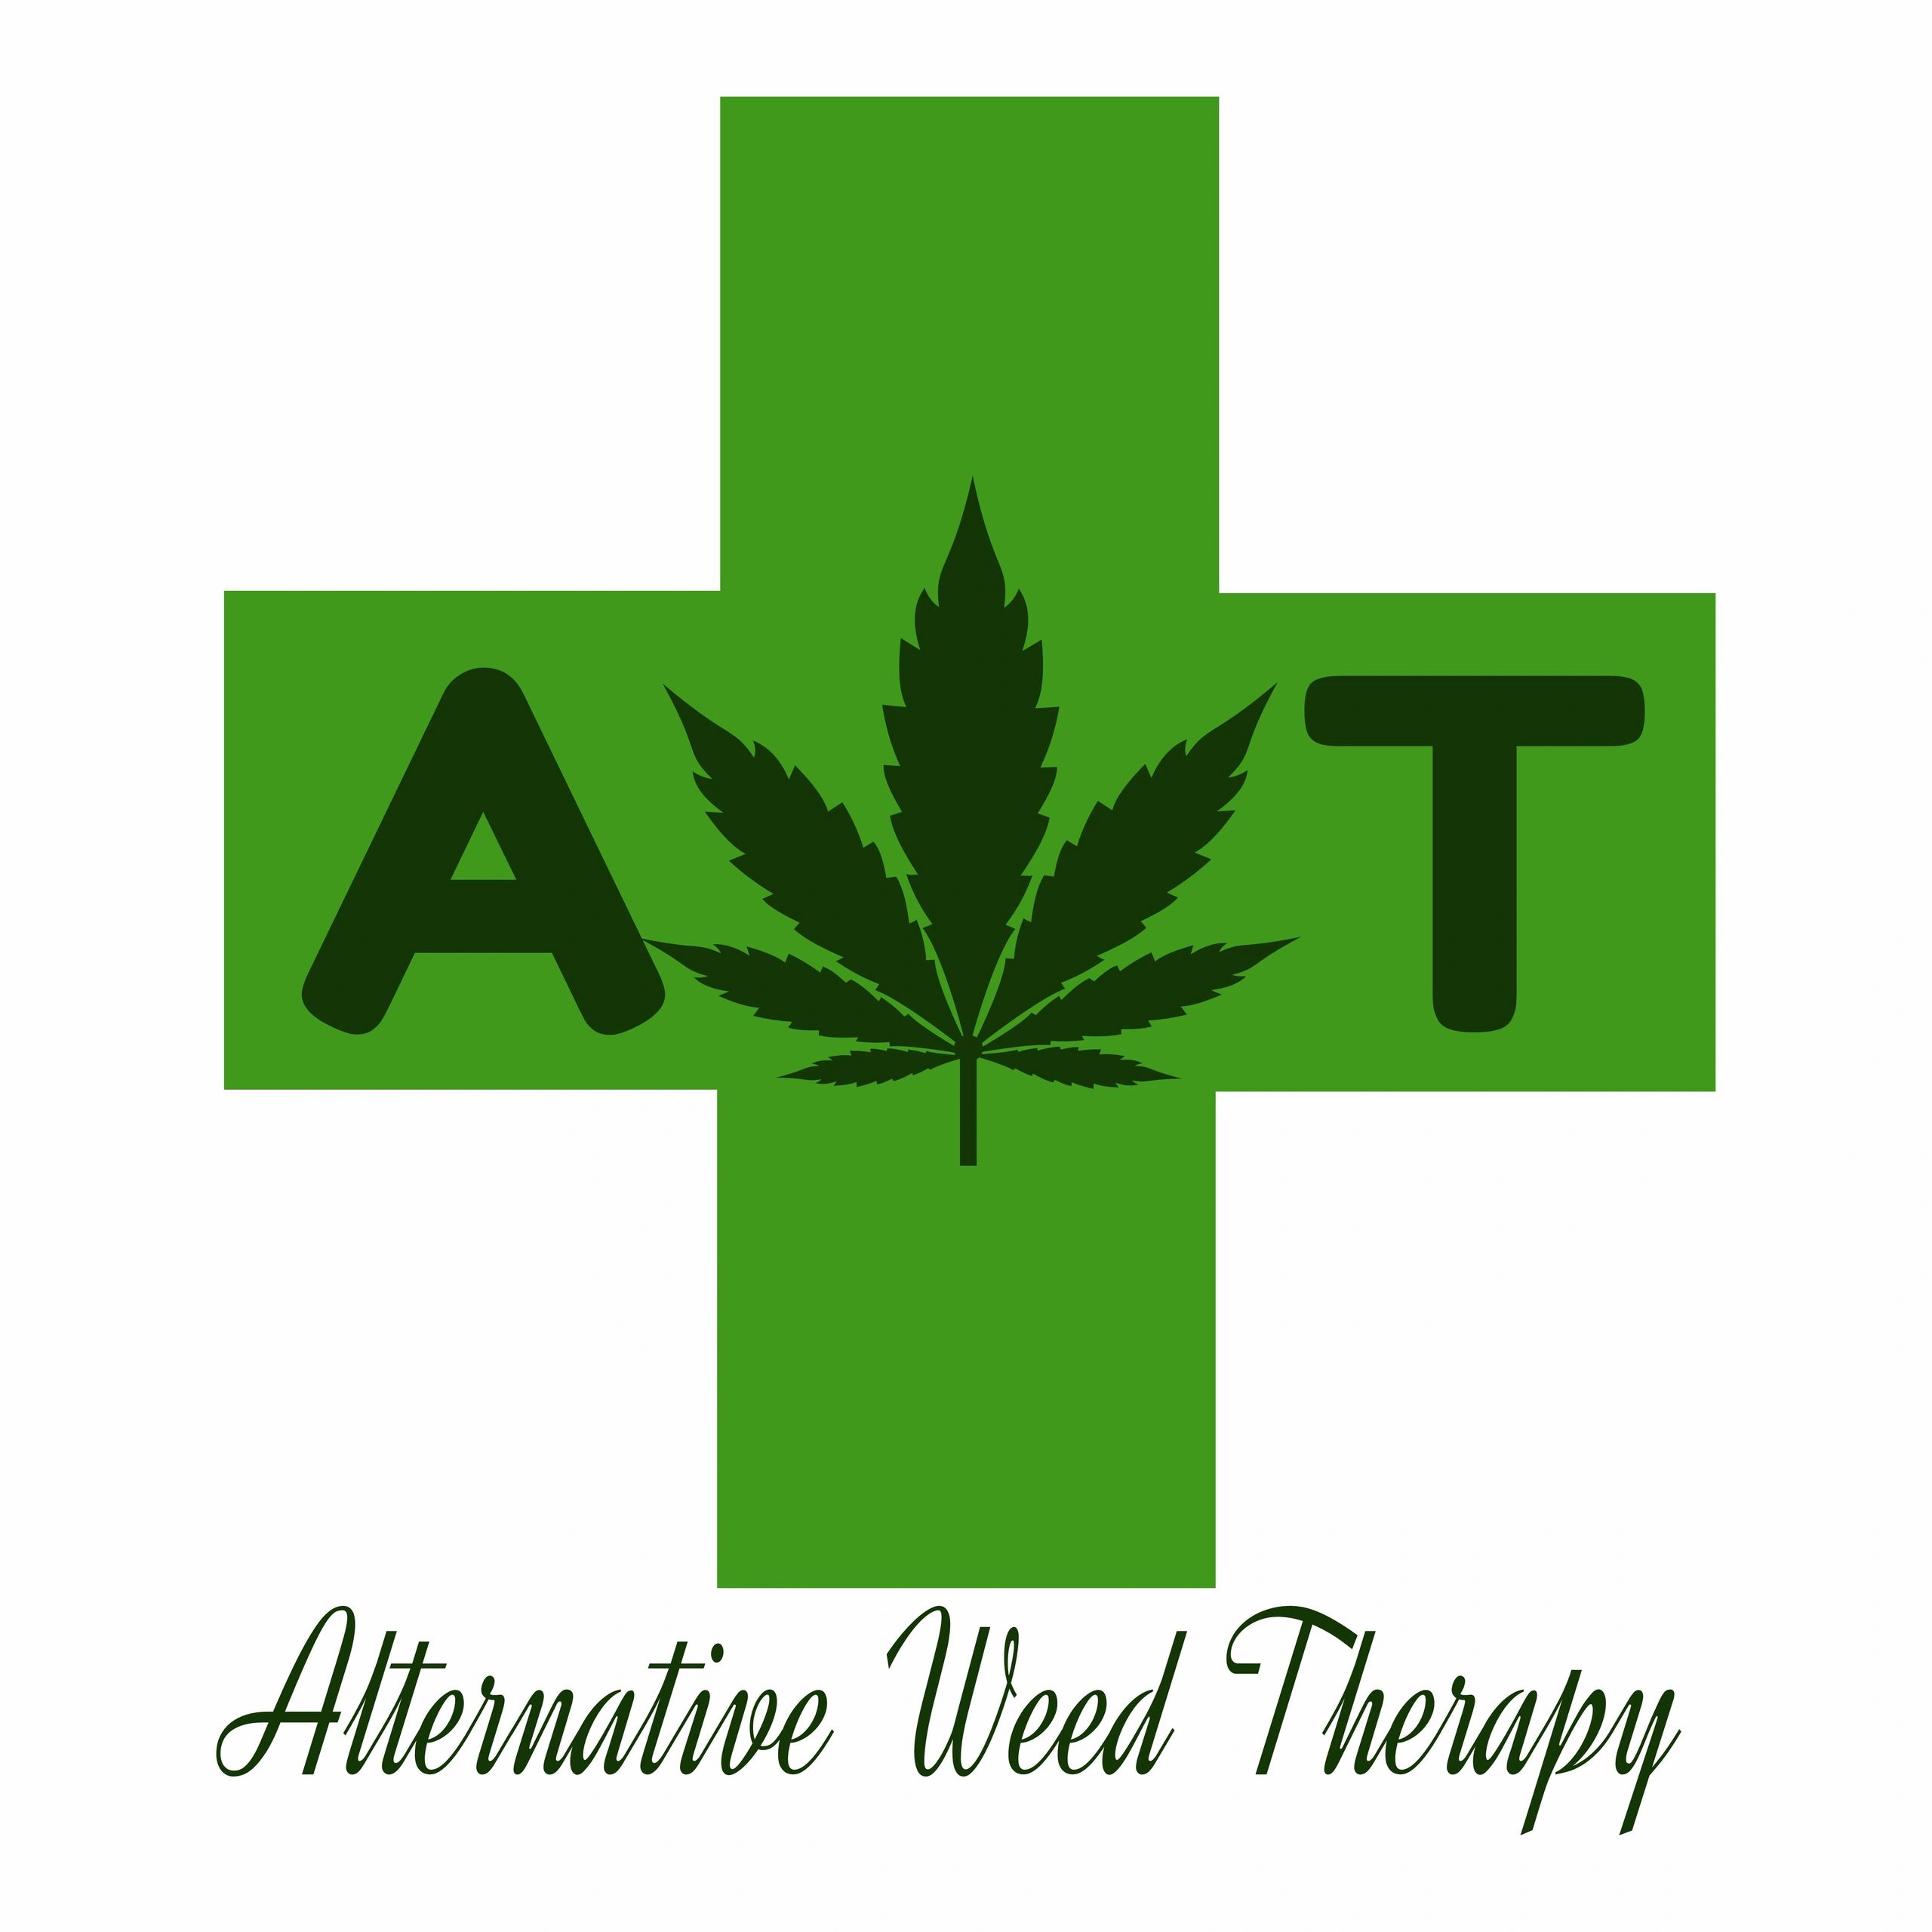 ALTERNATIVE MEDICINE WITH MEDICAL MARIJUANA - Marijuana|Cannabis|Effects|Thc|People|Cbd|Weed|Plant|Alternatives|Drug|Pain|Health|Plants|Products|Lotus|Smoke|Cannabinoids|Tea|Alternative|Time|Cultures|Research|Way|World|Substitute|Drugs|States|Inflammation|Effect|List|Symptoms|Years|Damiana|Patients|Body|Substitutes|Quality|Brain|Strain|Herb|Medical Marijuana|Marijuana Alternatives|Wild Dagga|Blue Lotus|Marijuana Alternative|Siberian Motherwort|United States|Botanical Shaman|Blue Lotus Flower|Psychoactive Effects|Herbal Smoke|New Jersey|Chronic Pain|Cbd Oil|Natural Plants|Legal Substitute|Marijuana Substitutes|Marijuana-Like Effects|Alternative Weed Therapy|Synthetic Marijuana|Natural Herbs|Cannabis Plant|Marijuana Substitute|Psychoactive Properties|Many Cultures|Green Tea|Edible Marijuana|Medical Marijuana Laws|Psychoactive Effect|Long Time